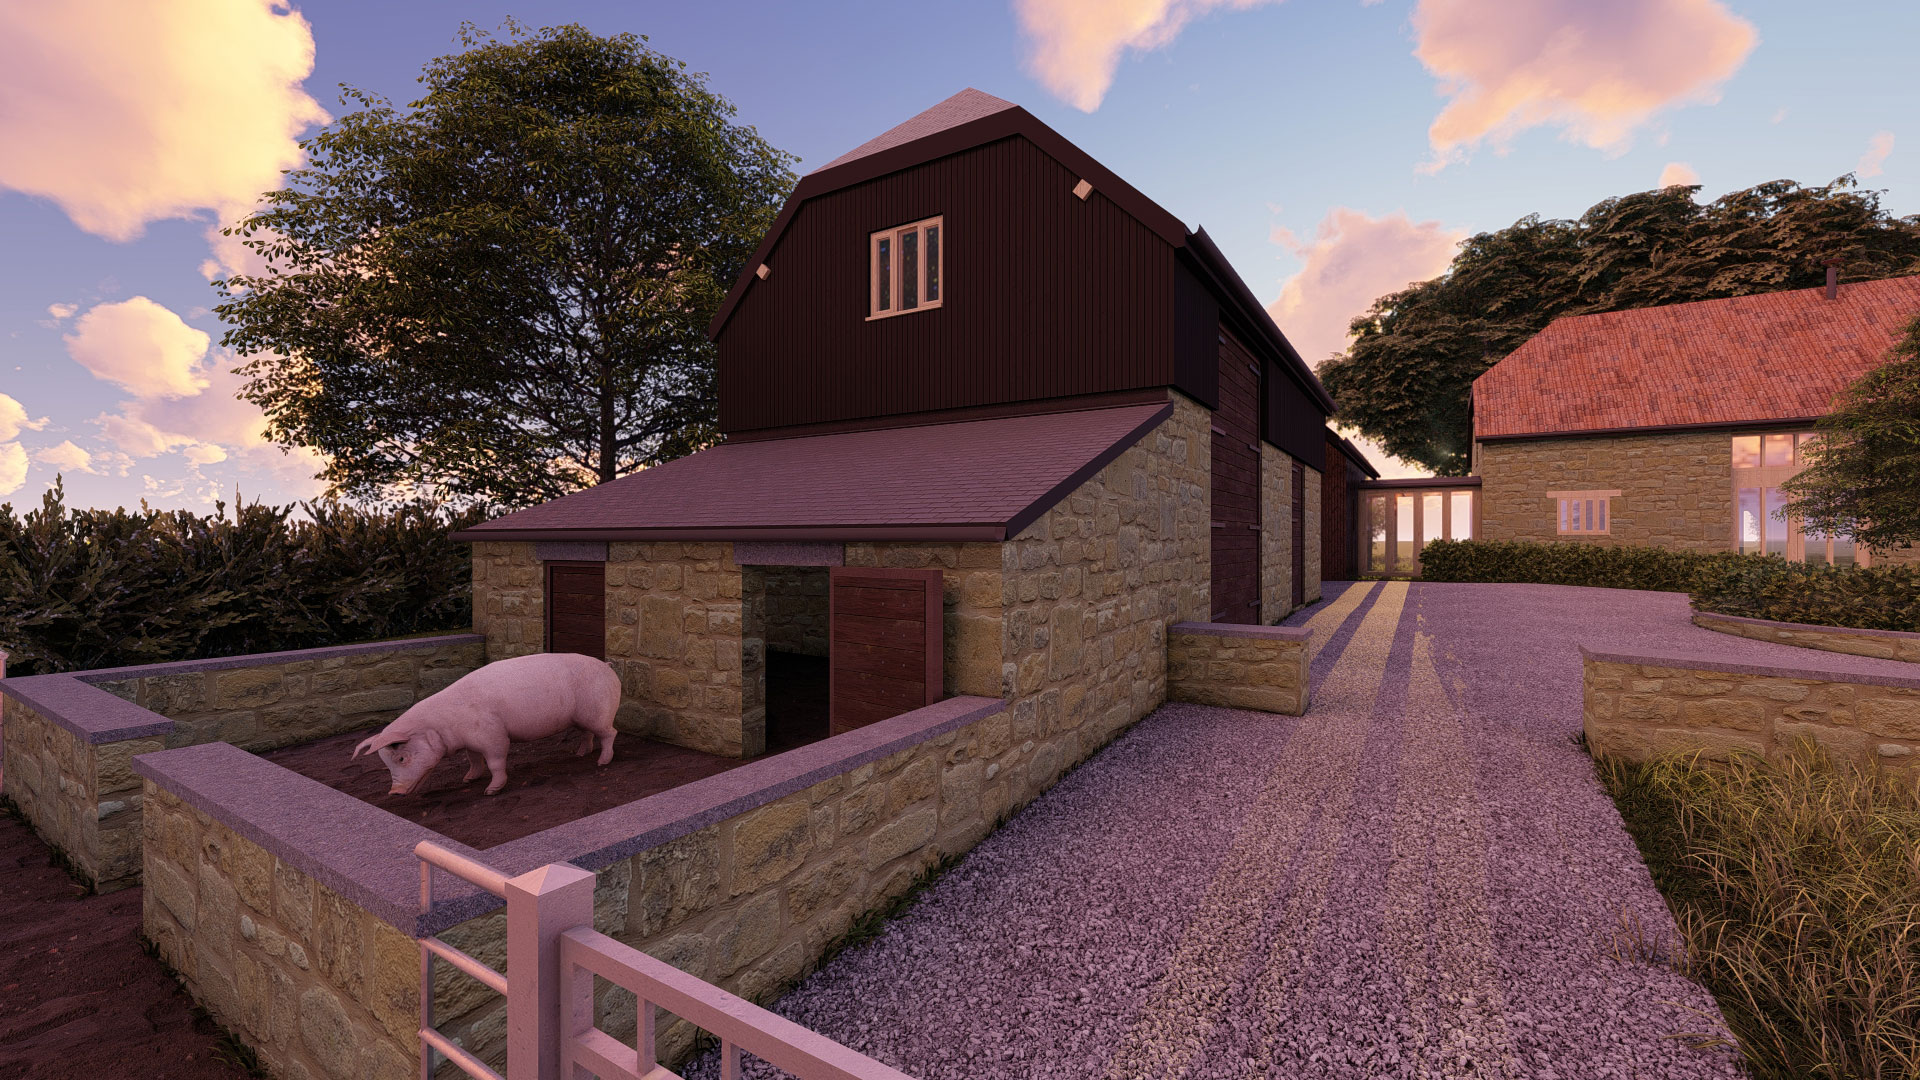 class q conversion visual of house with pig sty attached at sunset